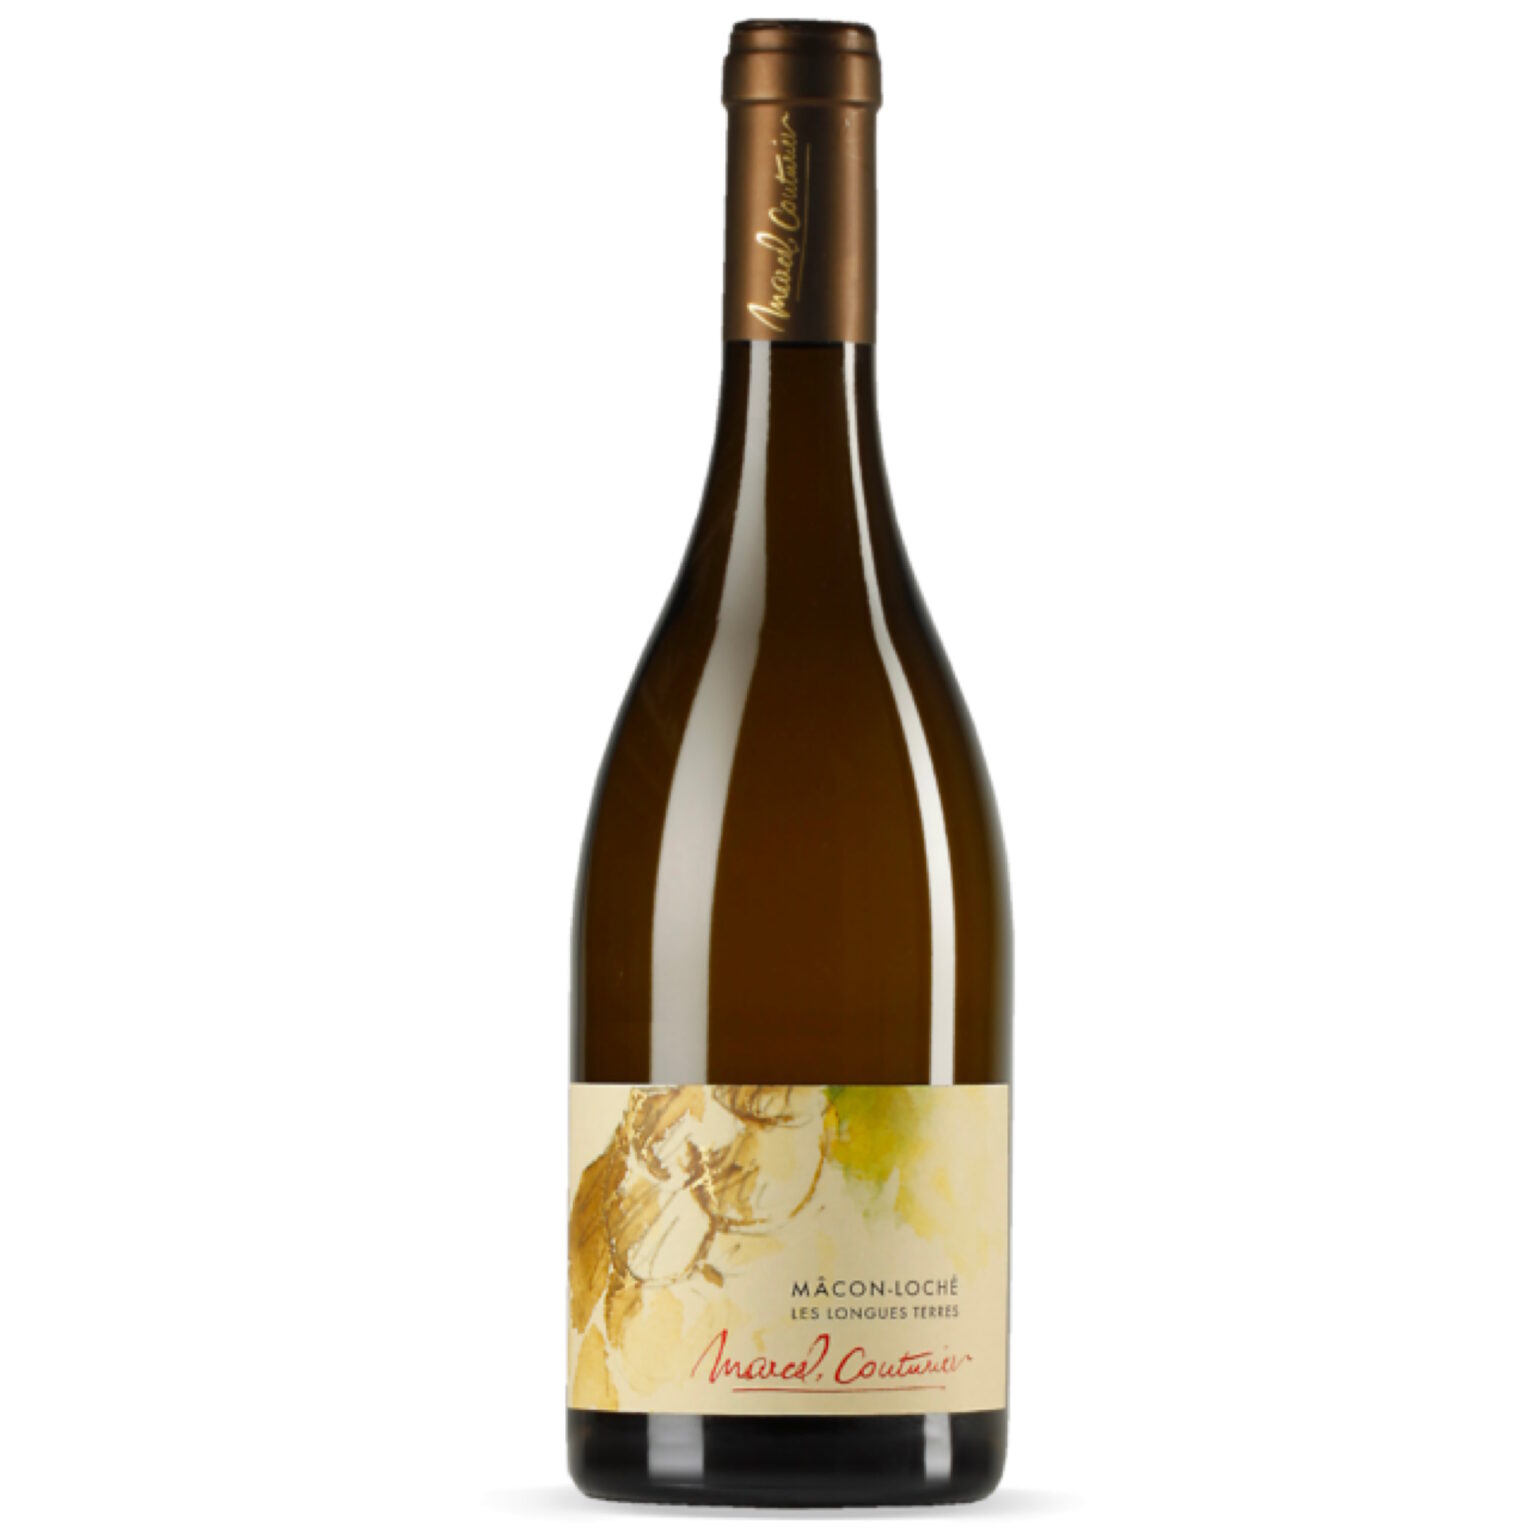 Marcel Couturier Pouilly Fuisse